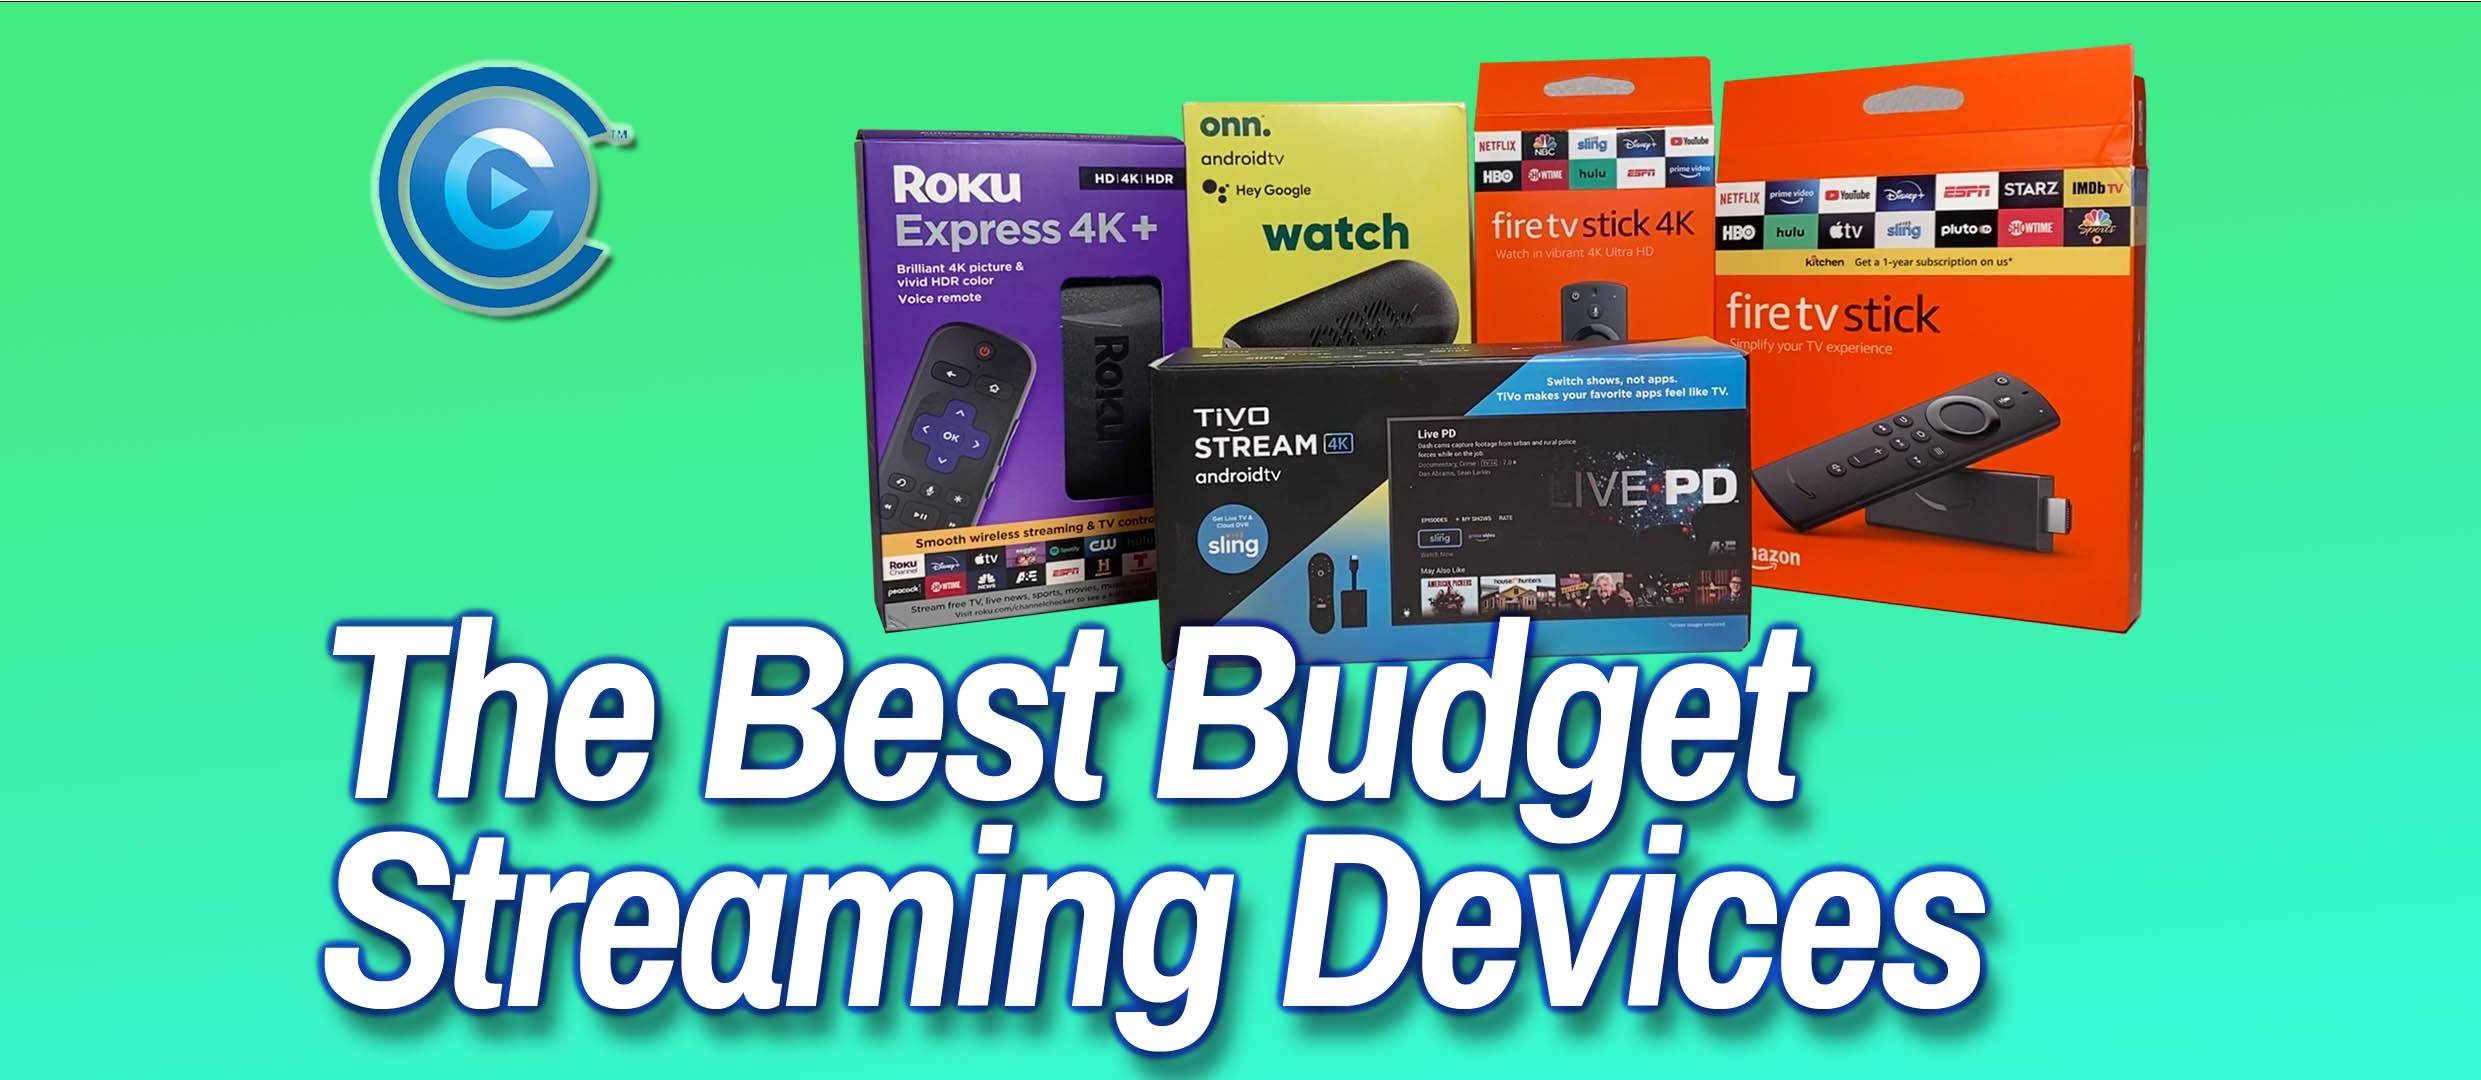 Video: The Best Budget Streaming Devices for 2021